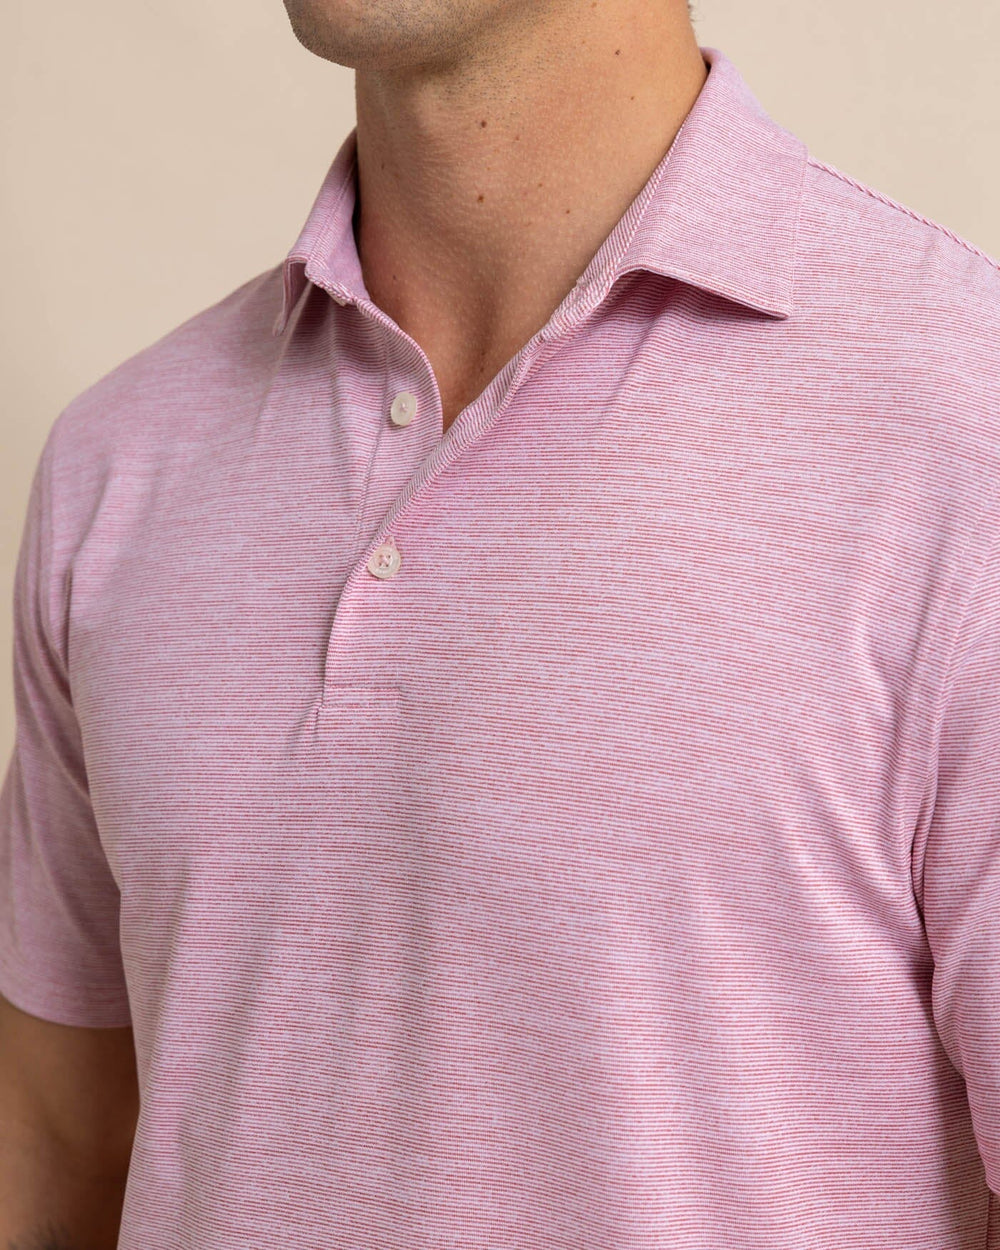 The detail view of the Southern Tide Team Colors Driver Spacedye Polo Shirt by Southern Tide - Crimson